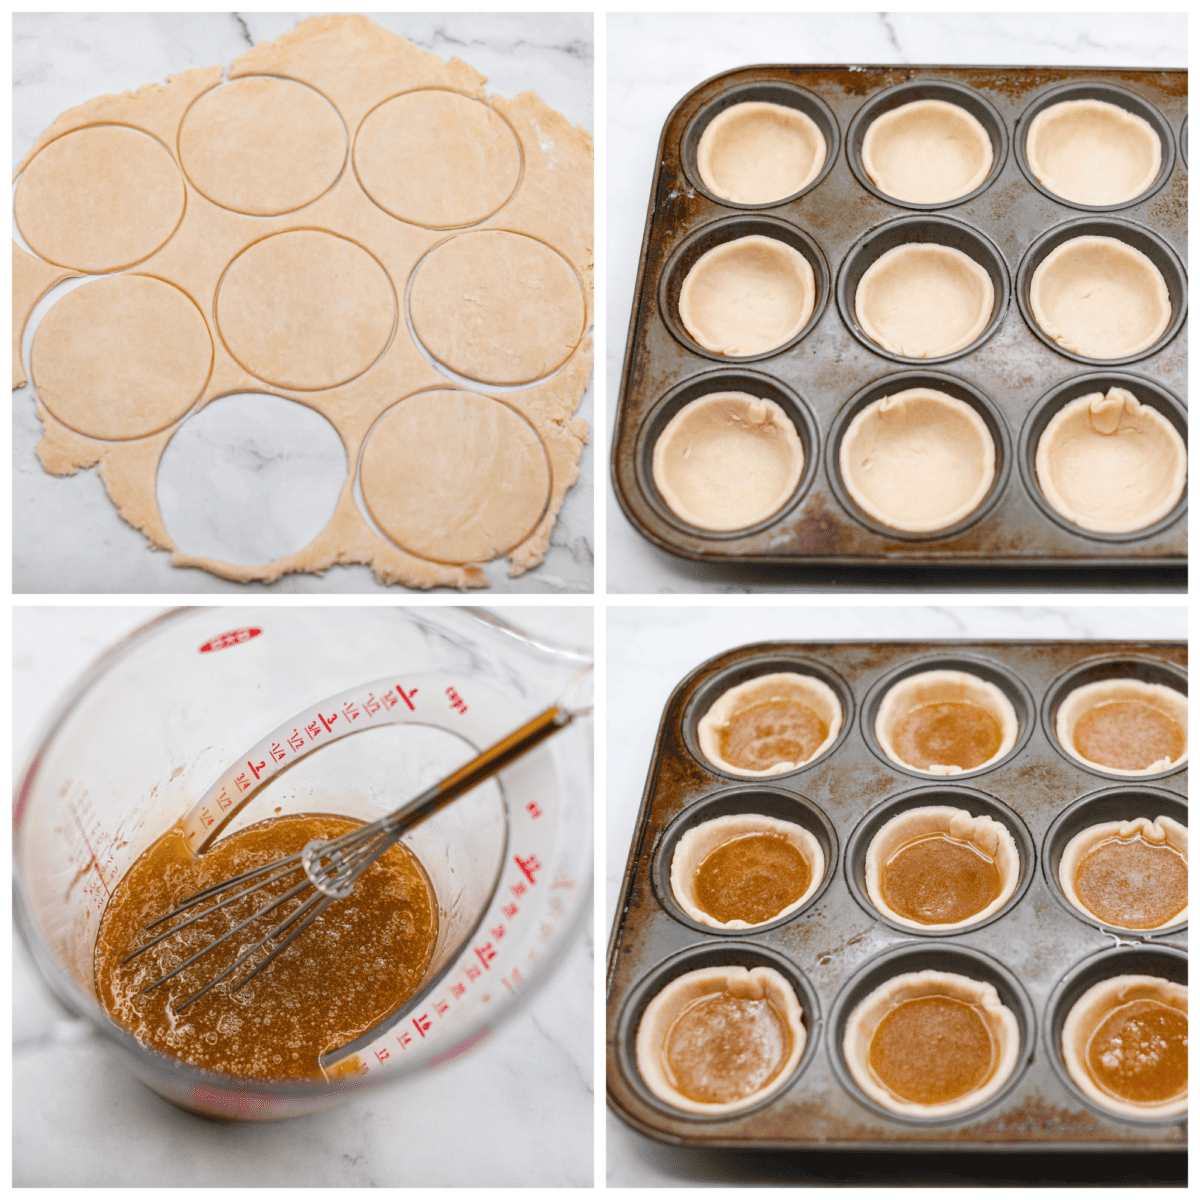 4-photo collage of the crusts and filling being prepared.